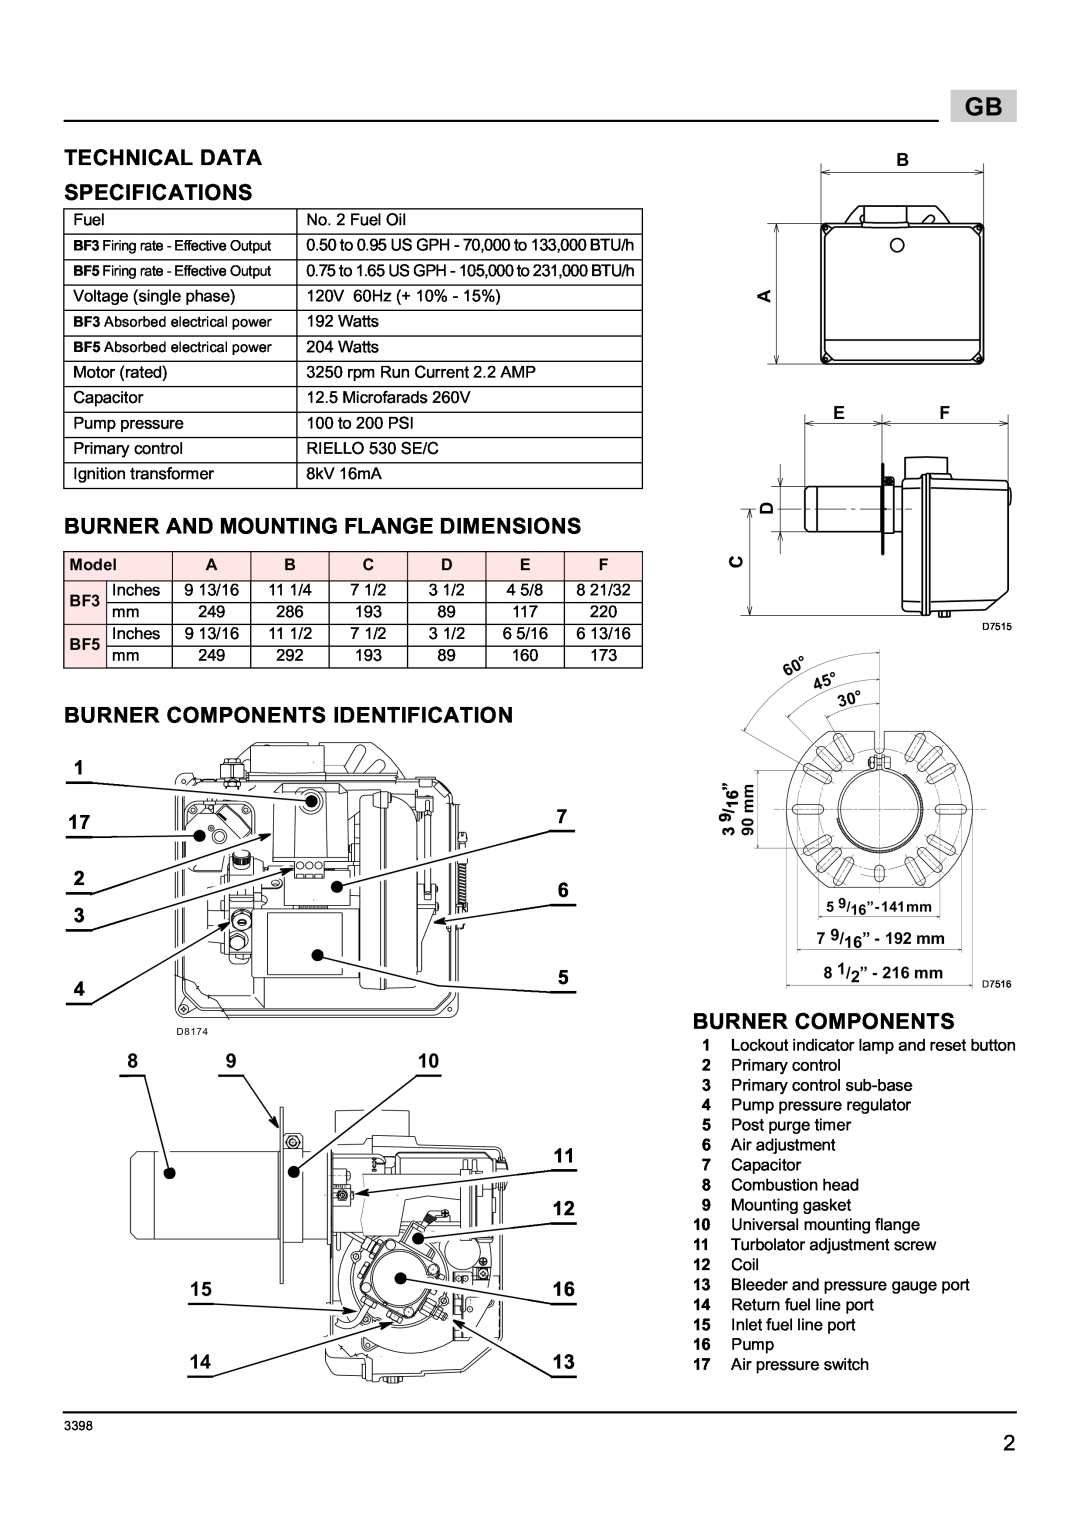 Weil-McLain 800061000-Brn-PO Rie BF5 Technical Data Specifications, Burner And Mounting Flange Dimensions, B A E F D C 